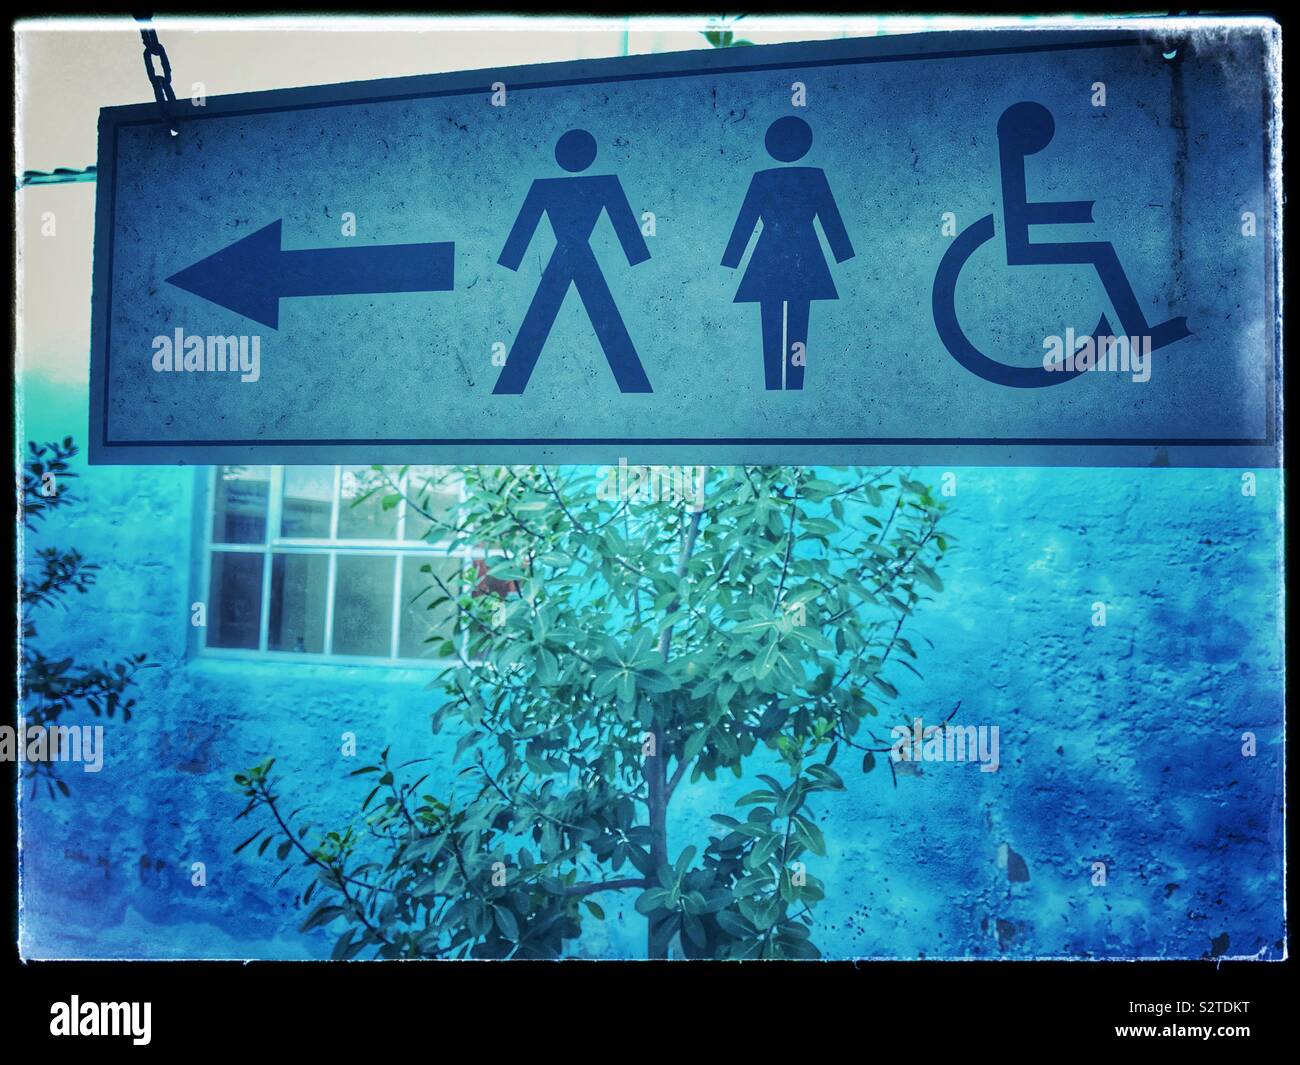 Restrooms sign. Stock Photo